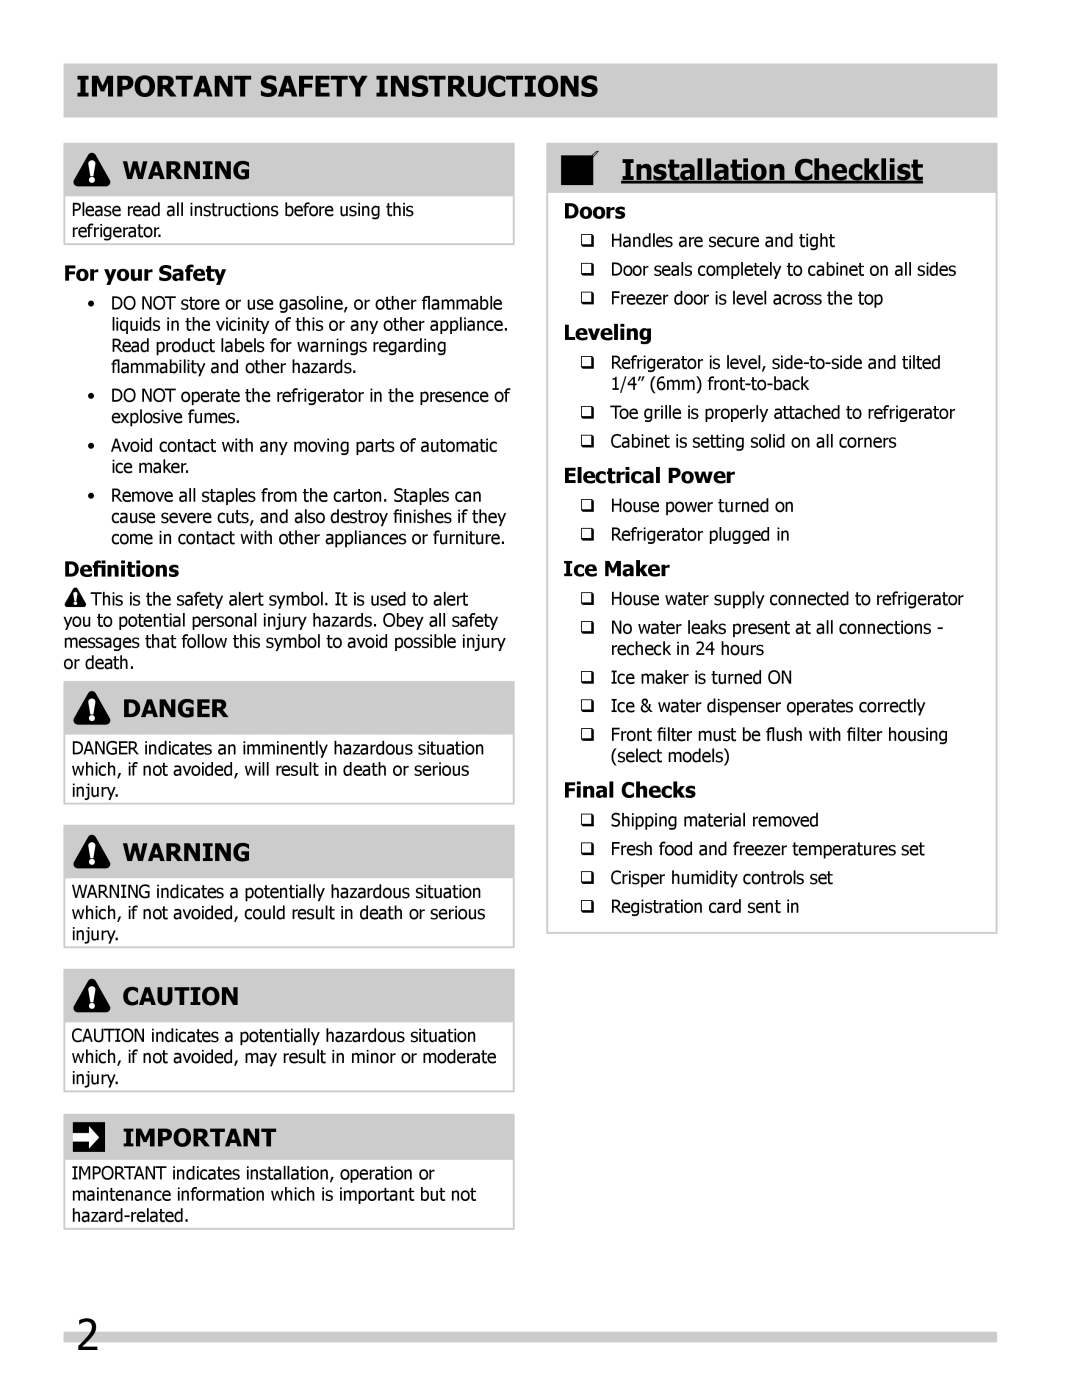 Frigidaire FFUS2613LP Important Safety Instructions, Installation Checklist, Danger, For your Safety, Definitions, Doors 